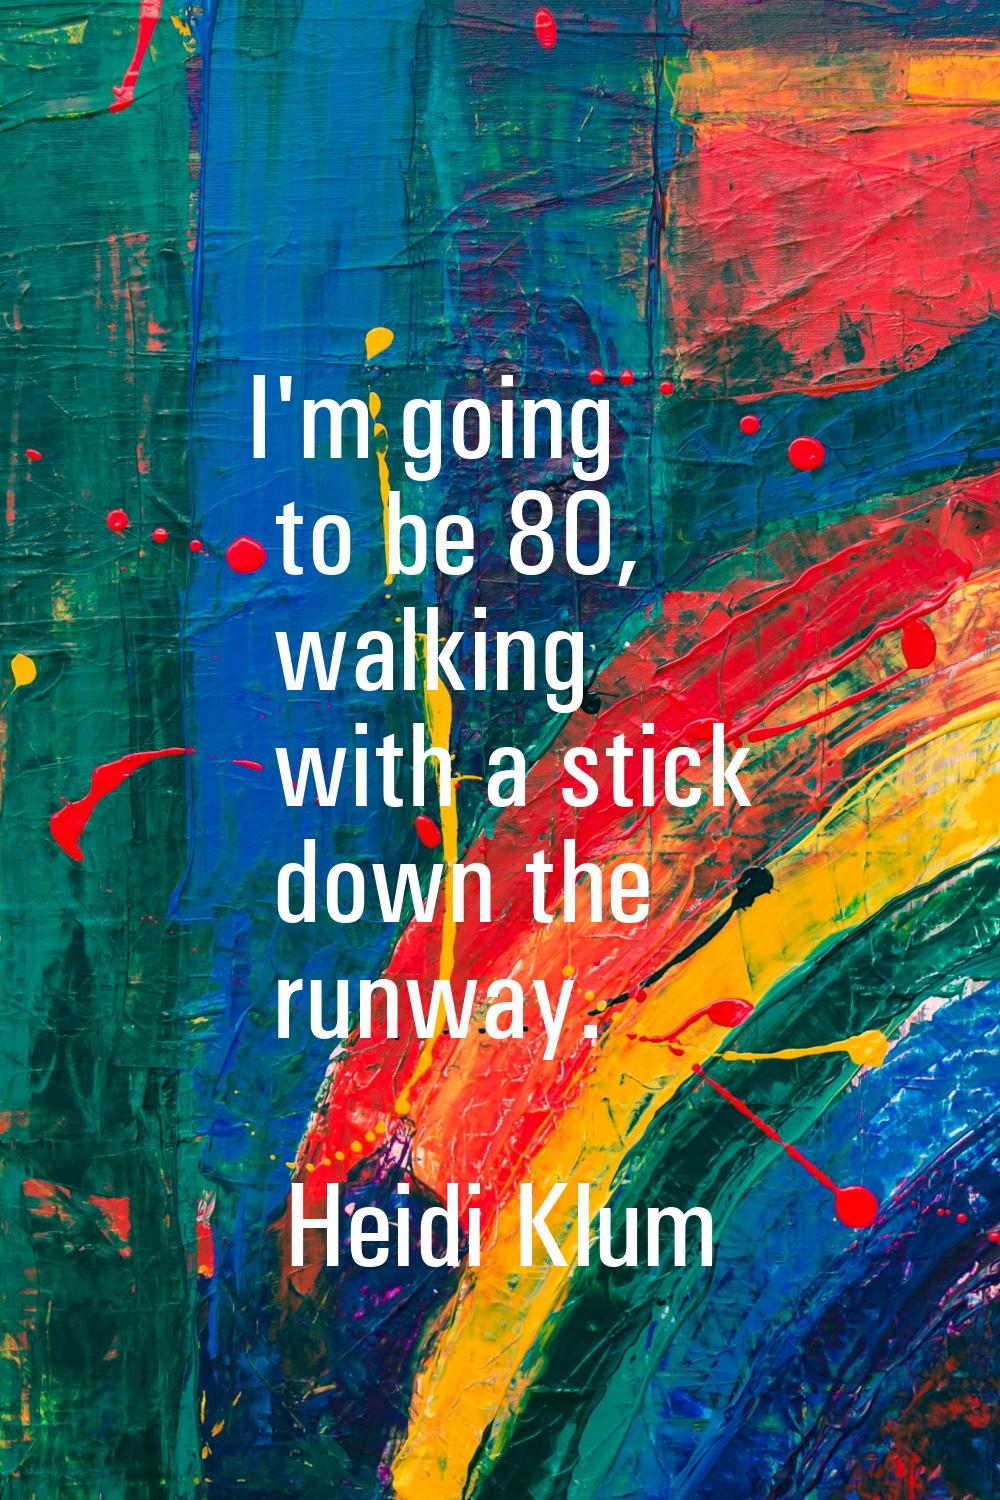 I'm going to be 80, walking with a stick down the runway.